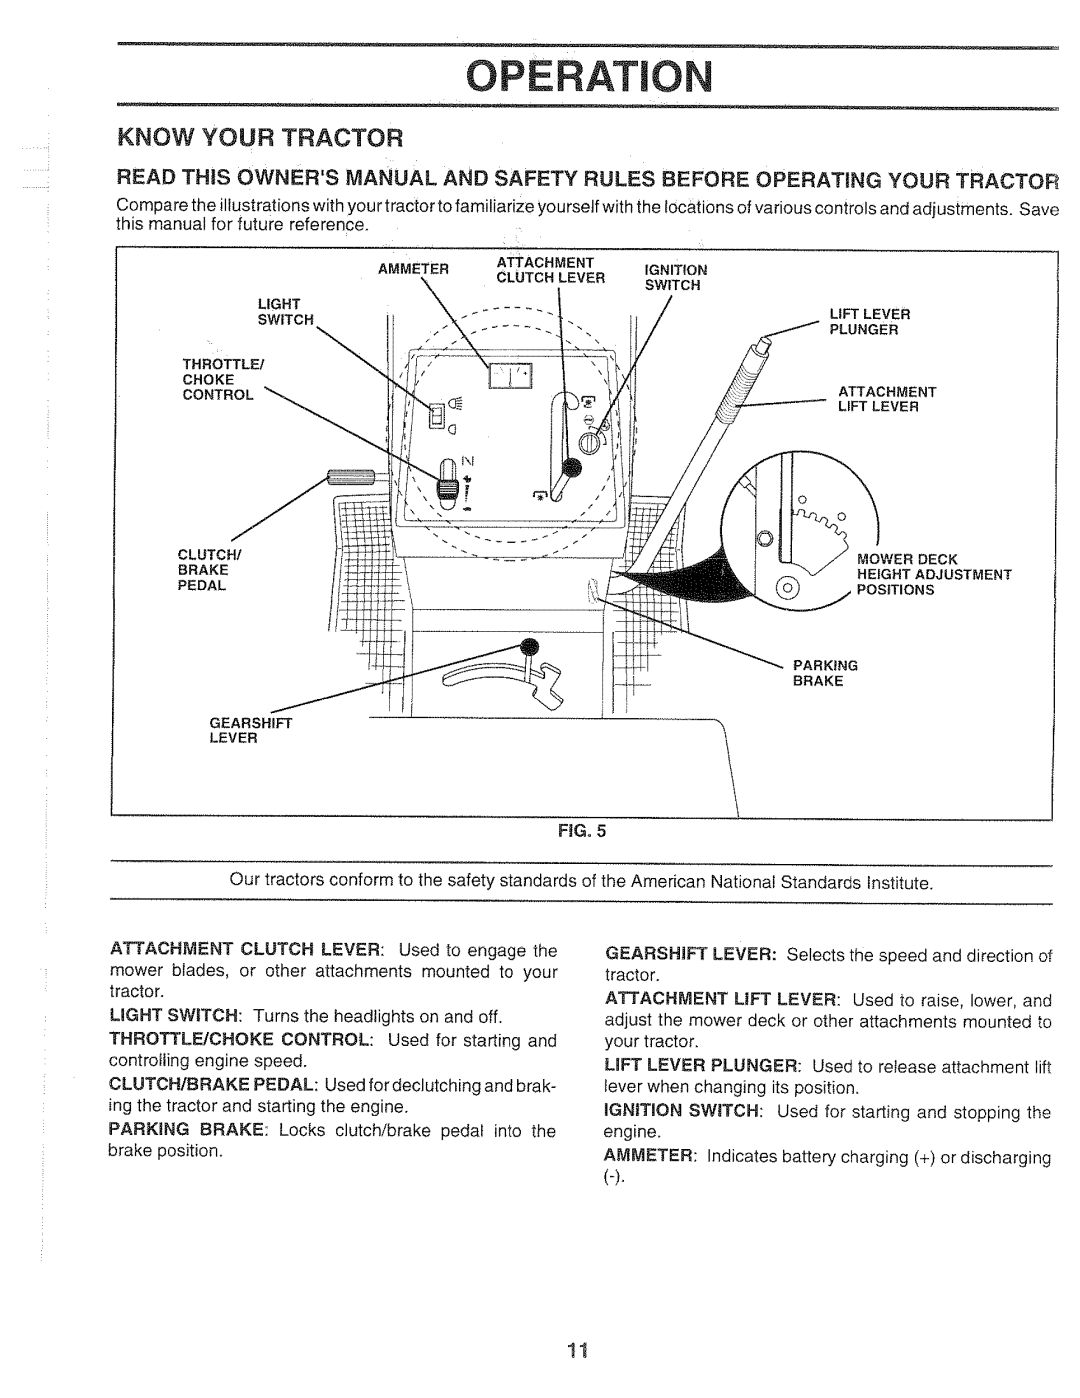 Sears 917.2565 manual Operation, Know Your Tractor, FIGo 